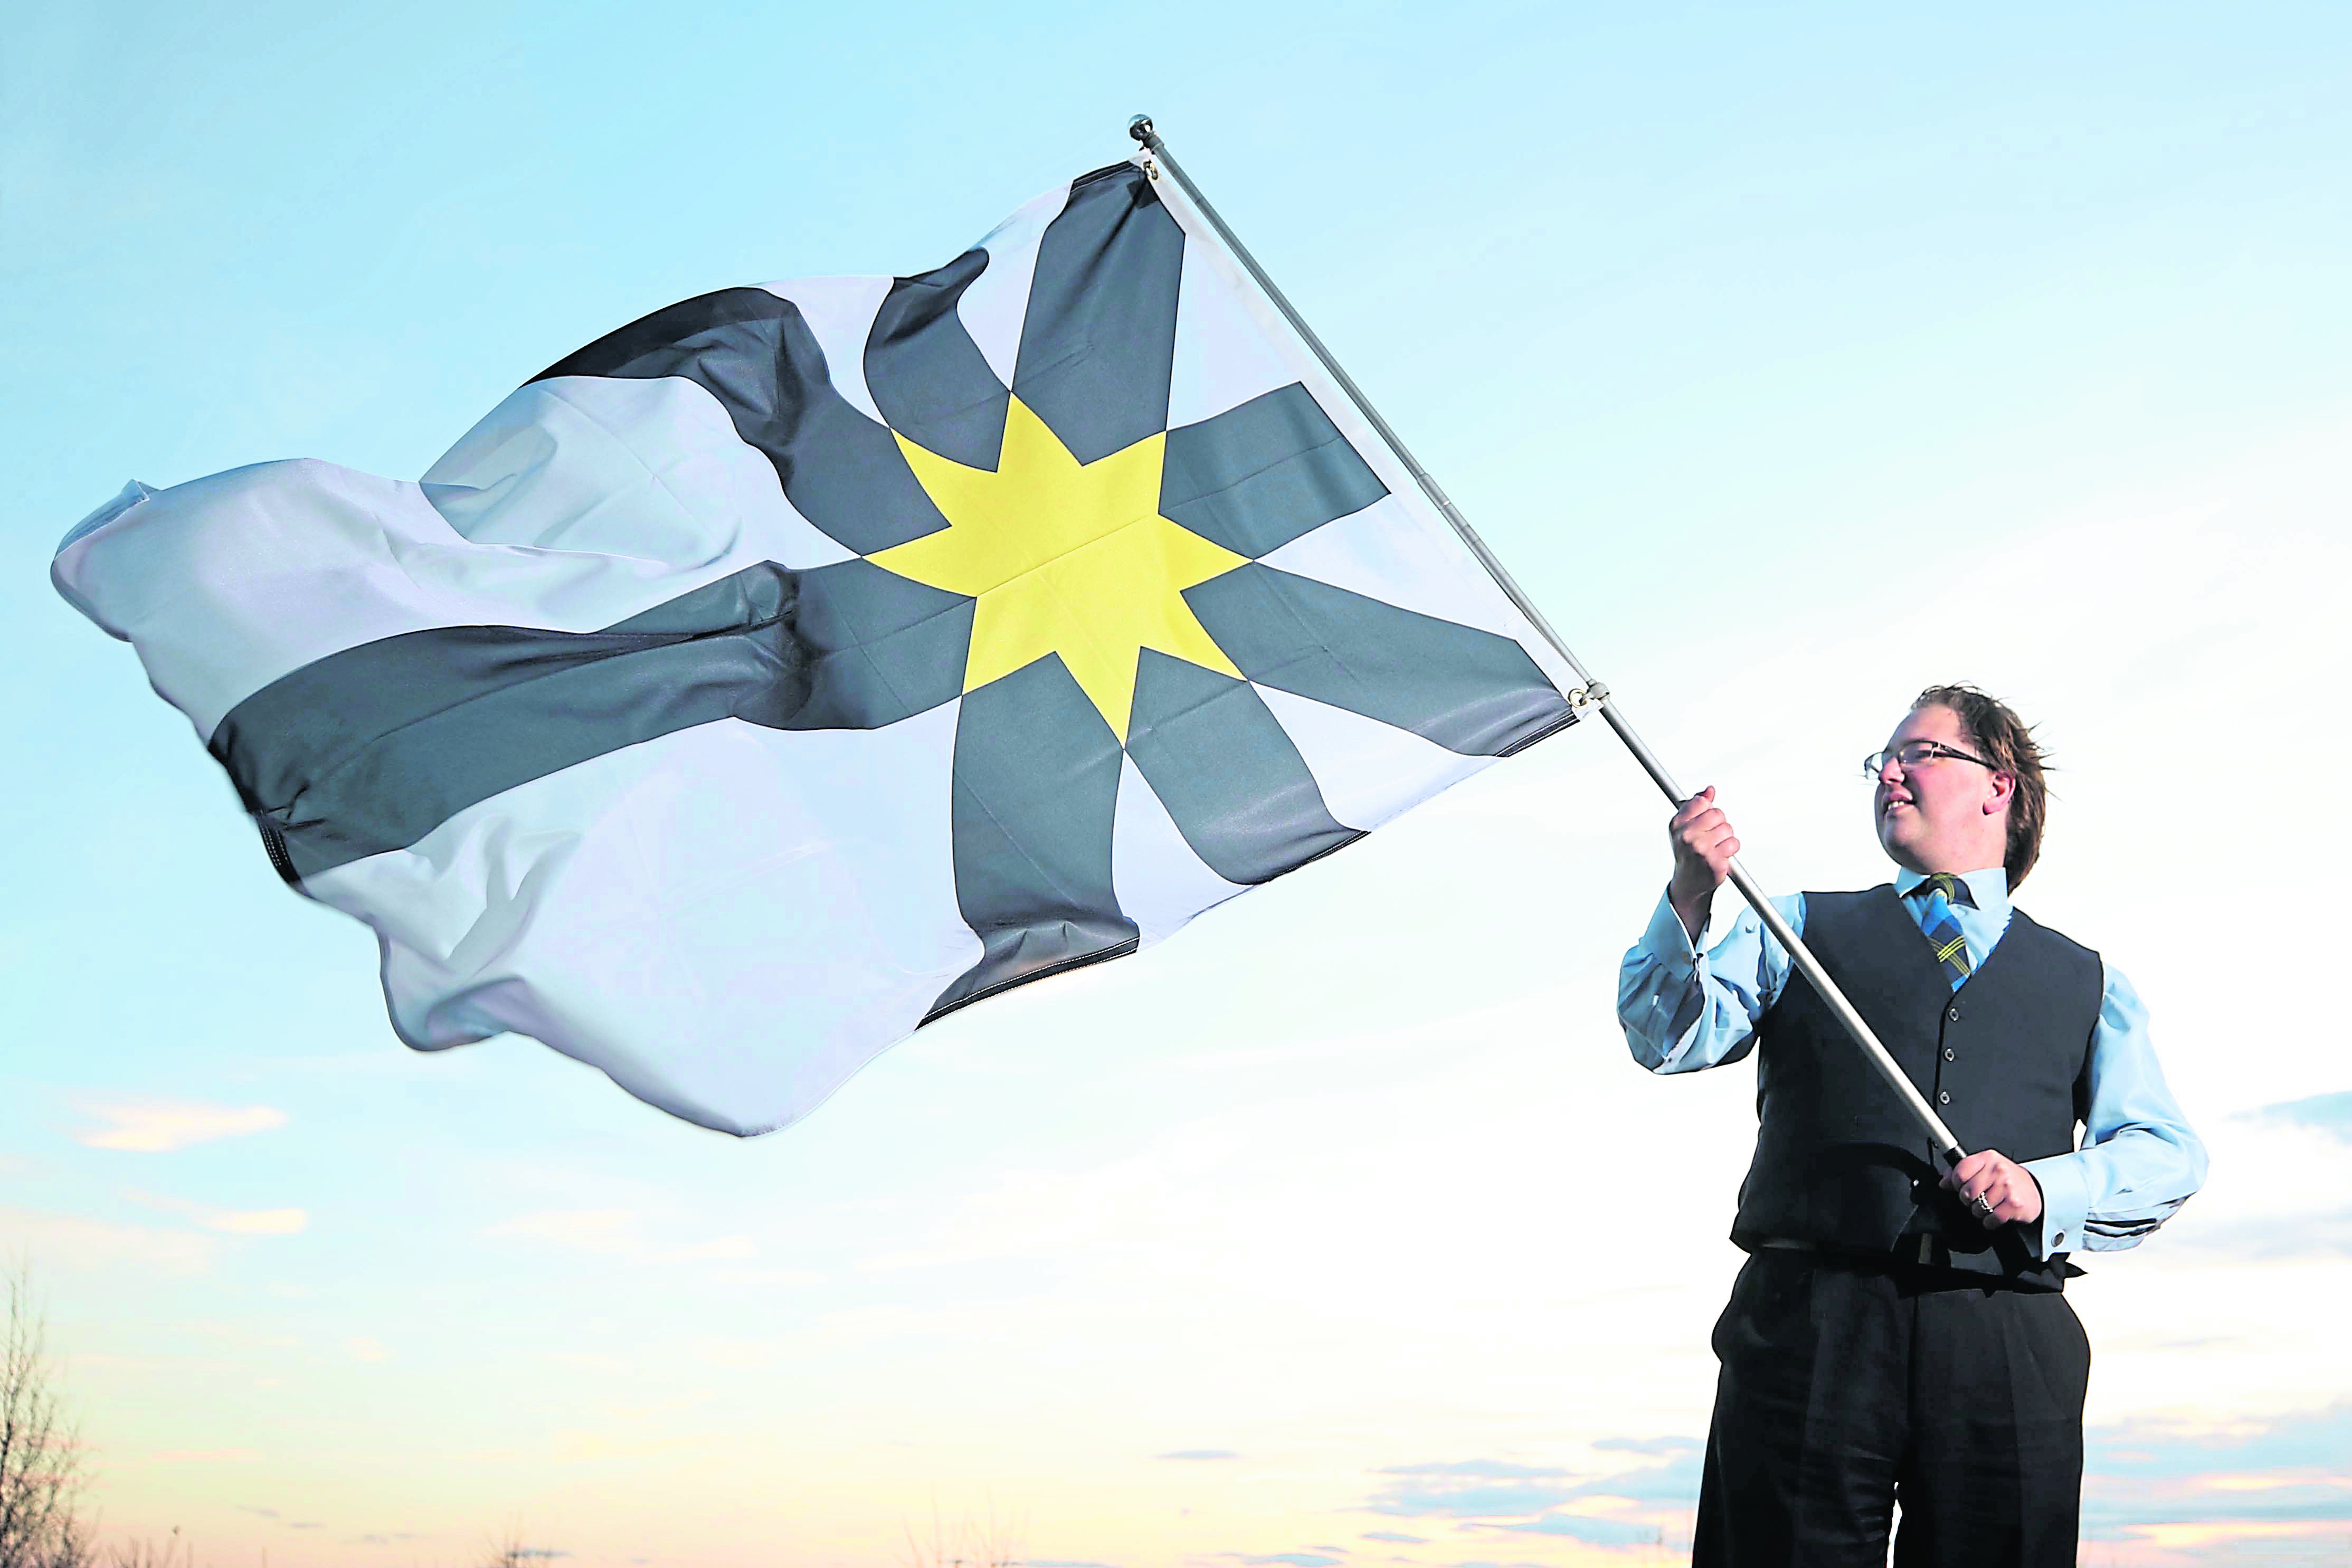 The new flag for Sutherland was unveiled at the Council offices in Golspie by Philip Tibbetts, the "Honorary Vexillologist at the Court of the Lord Lyon".